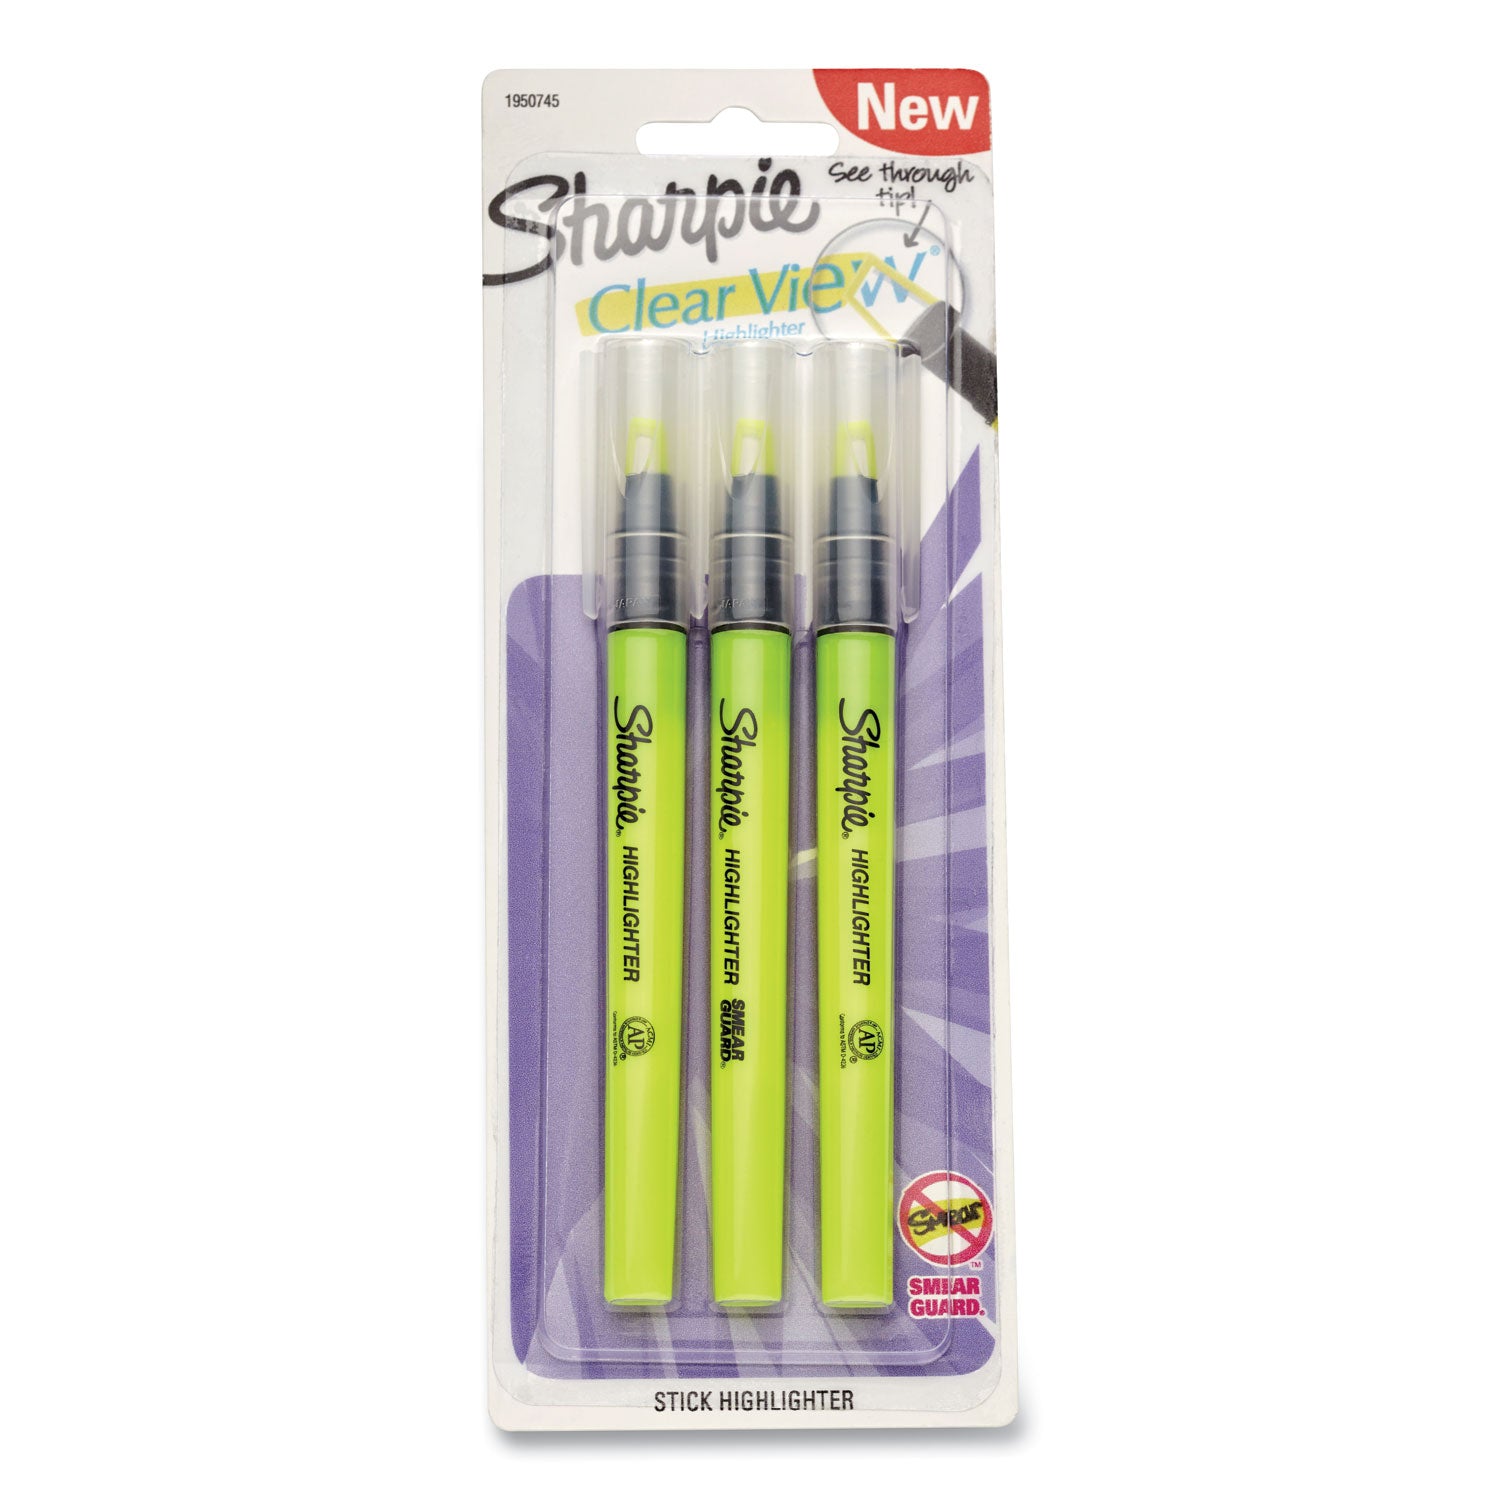 clearview-pen-style-highlighter-fluorescent-yellow-ink-chisel-tip-yellow-black-clear-barrel-3-pack_san1950745 - 2